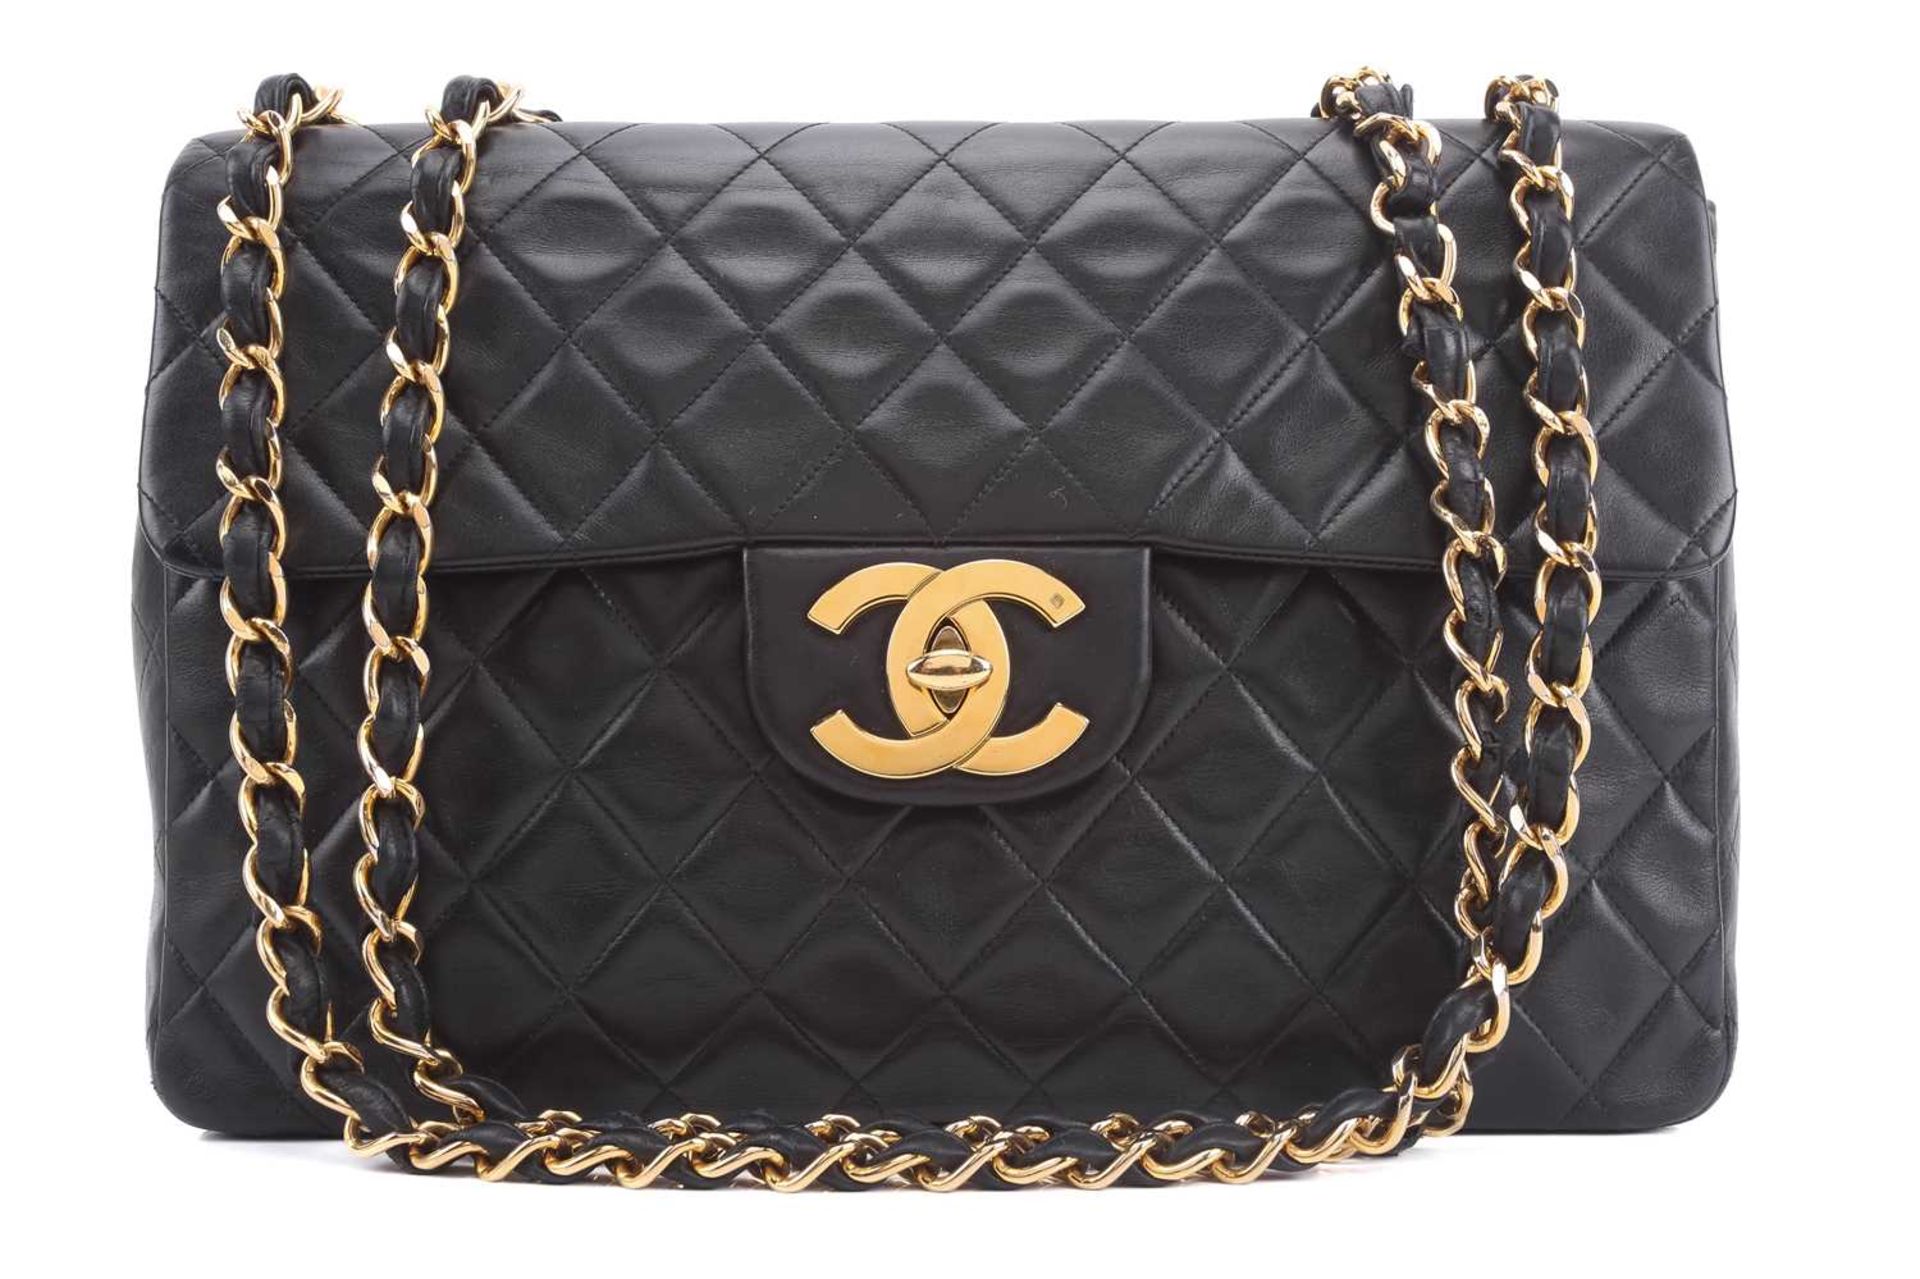 Chanel - a jumbo XL single flap bag in black diamond-quilted lambskin leather, circa 1991, - Image 2 of 15